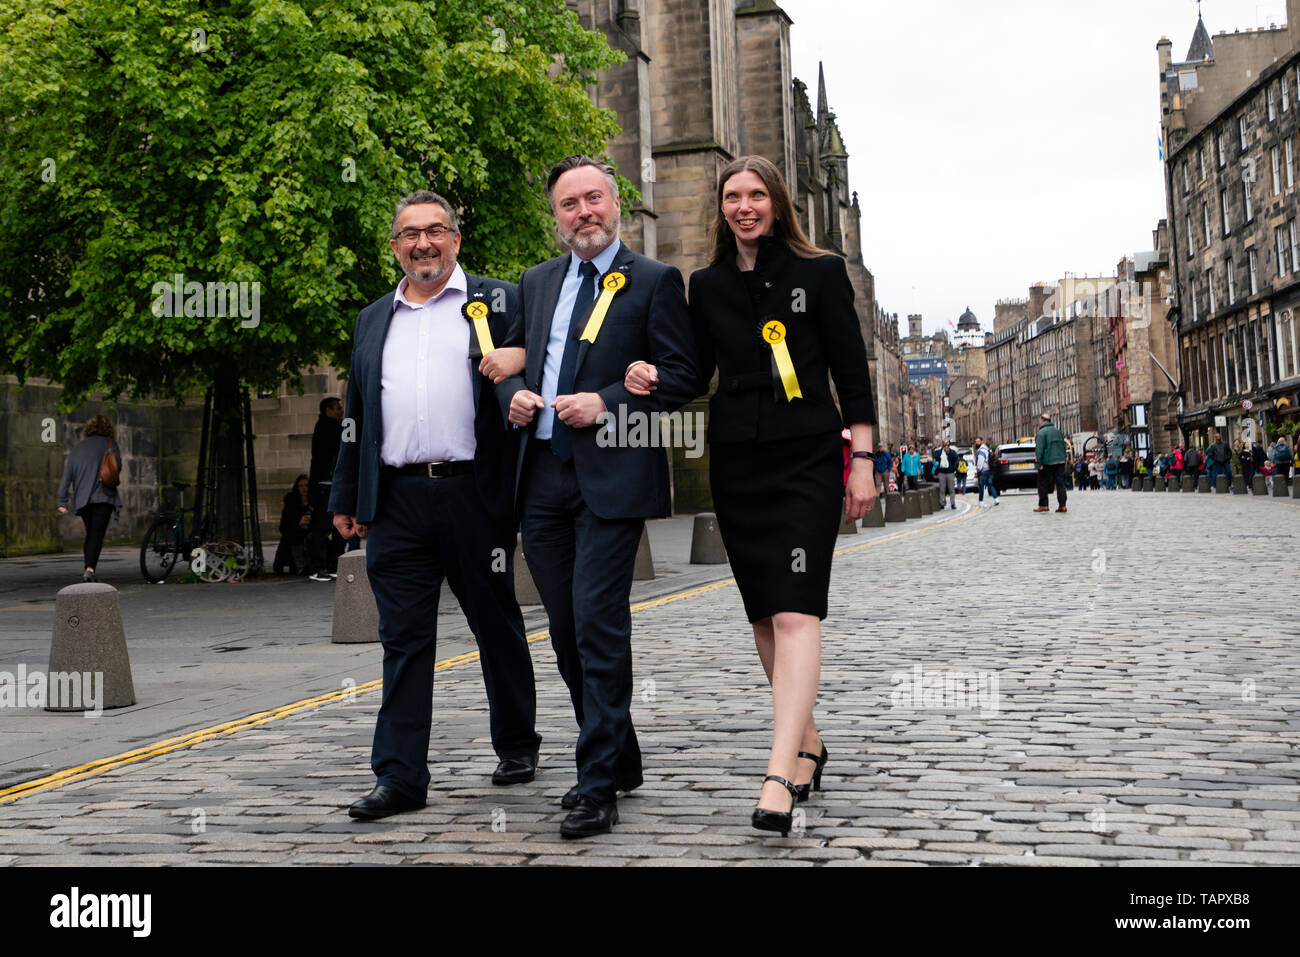 Edinburgh, Scotland, UK. 27th May, 2019. The six new Scottish MEPs are declared at the City Chambers in Edinburgh, Pictured l to r SNP's Christian Allard, Alyn Smith, and Aileen McLeod, Credit: Iain Masterton/Alamy Live News Stock Photo